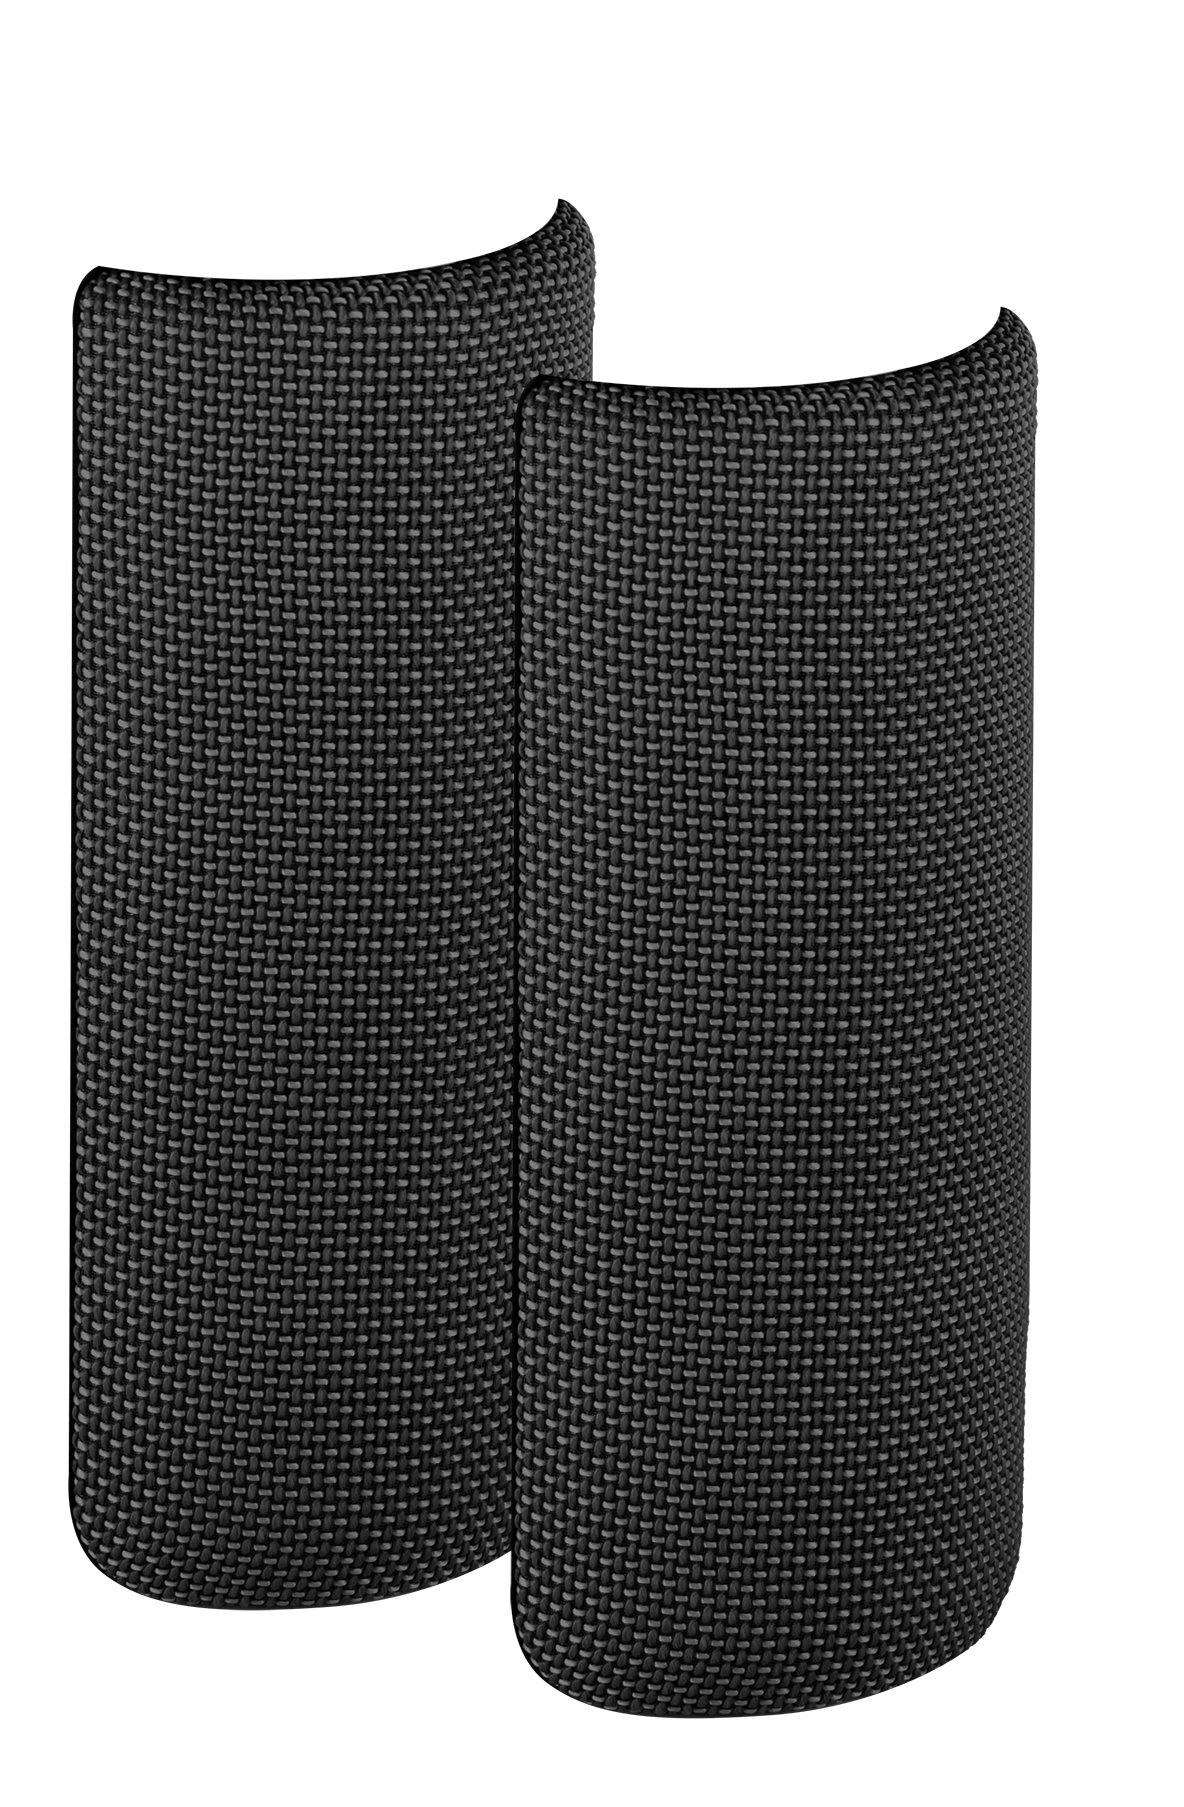 VisionTek Sound Tube Pro, Replacement Fabric Cover for Sound Tube Bluetooth Speaker, Black Cover - 900927